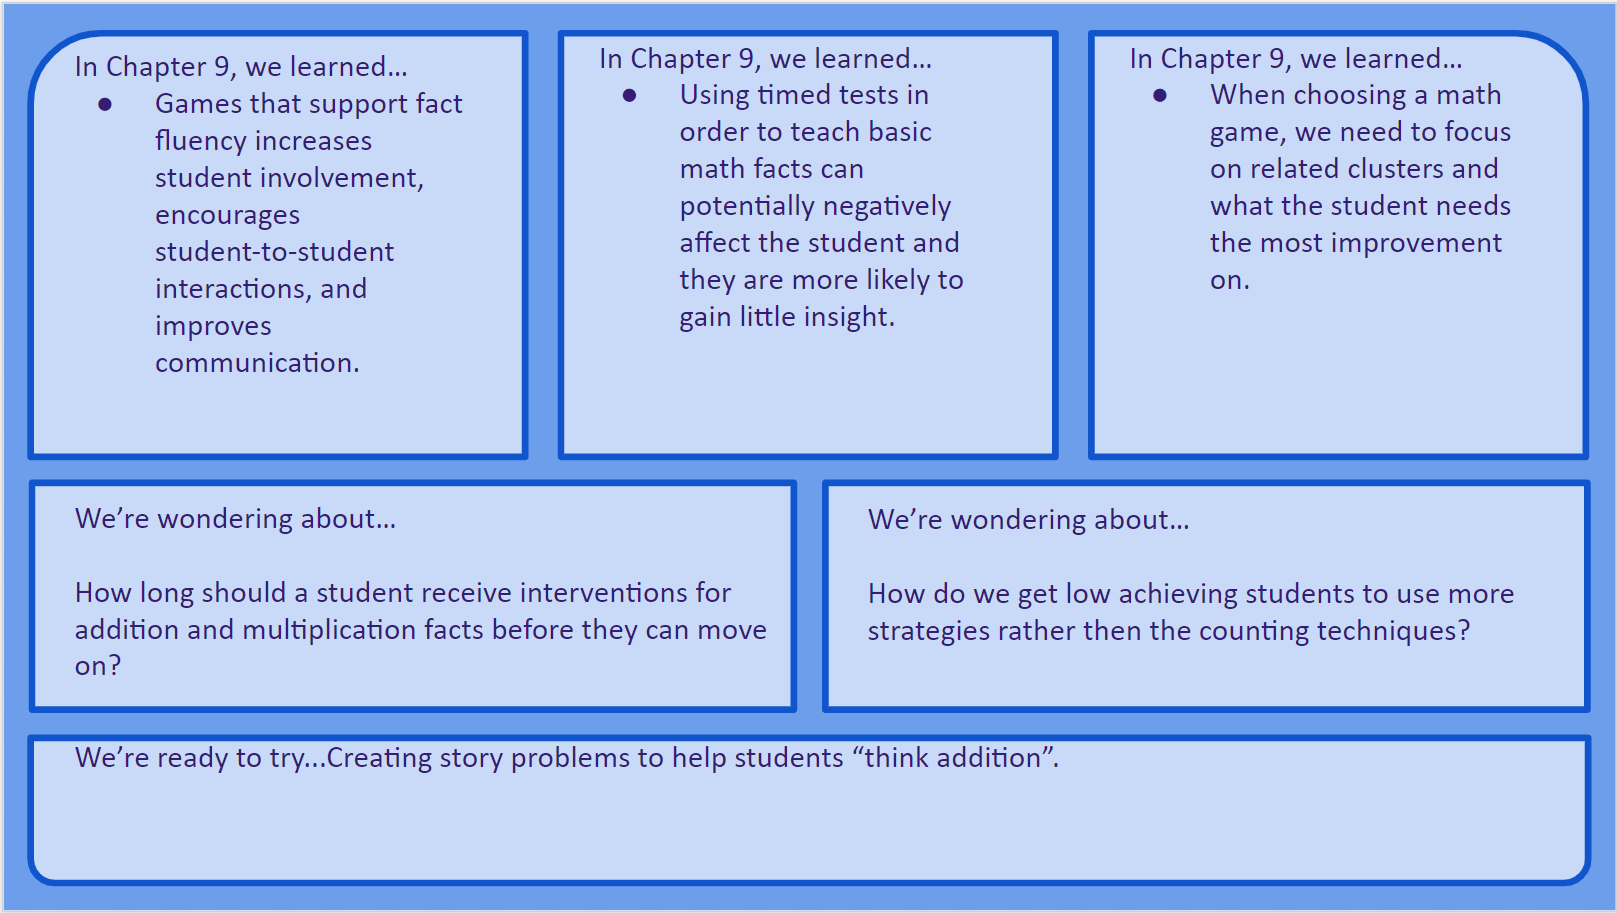 Example of a 3-2-1 slide. On top are three areas, each listening something learned in Chapter nine. Underneath are two sections, each giving something students were wondering about. Finally, on the bottom, one example of something students are ready to try.